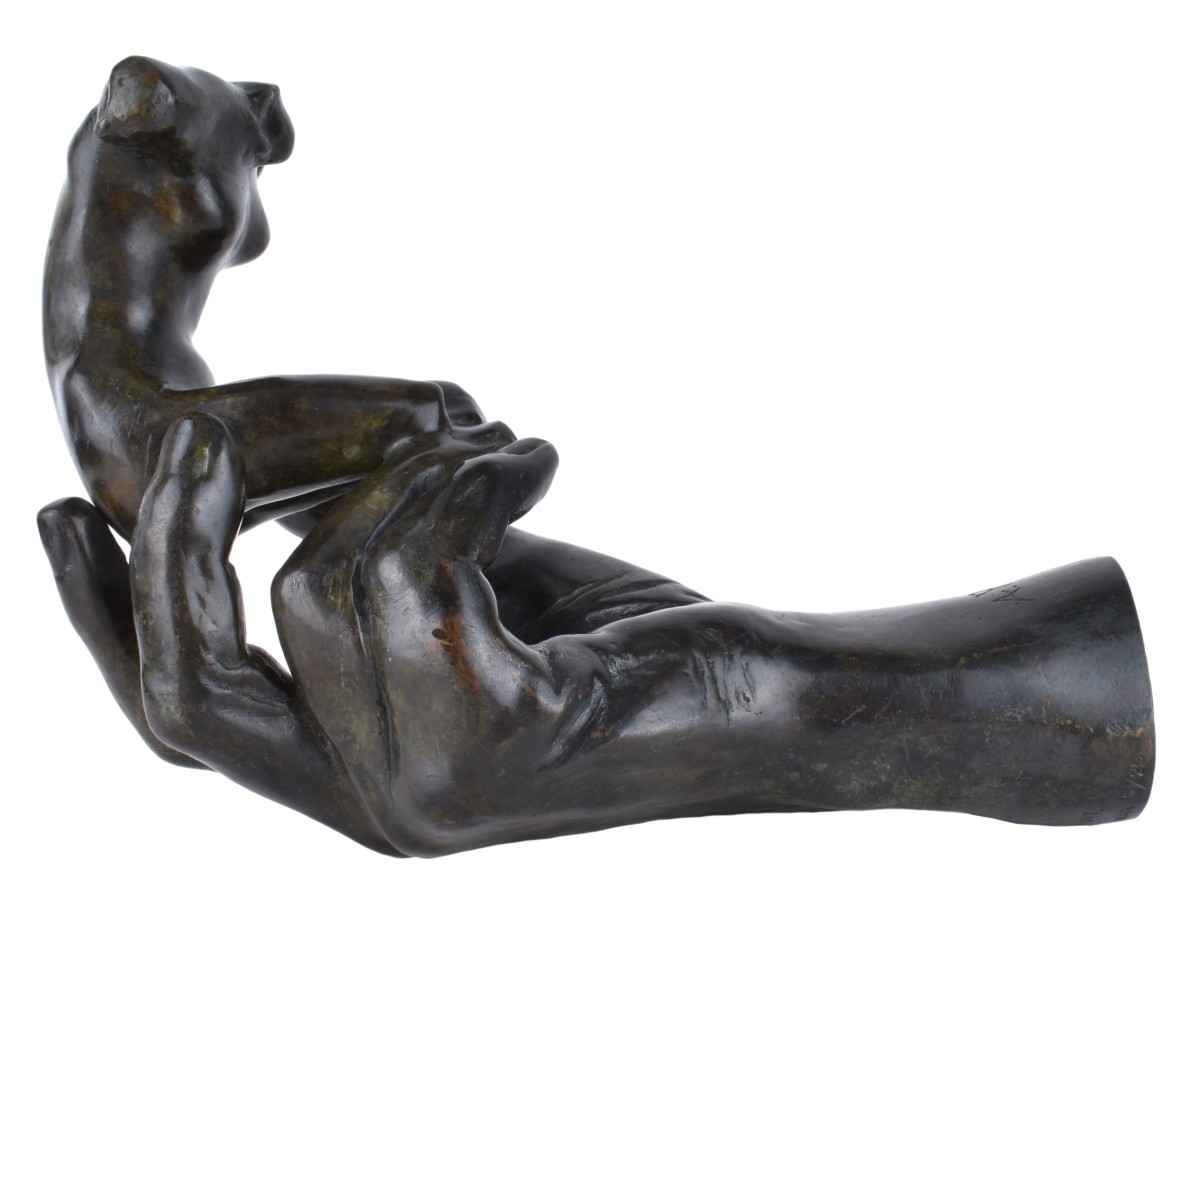 Auguste Rodin, French (1840 - 1917) Sculpture